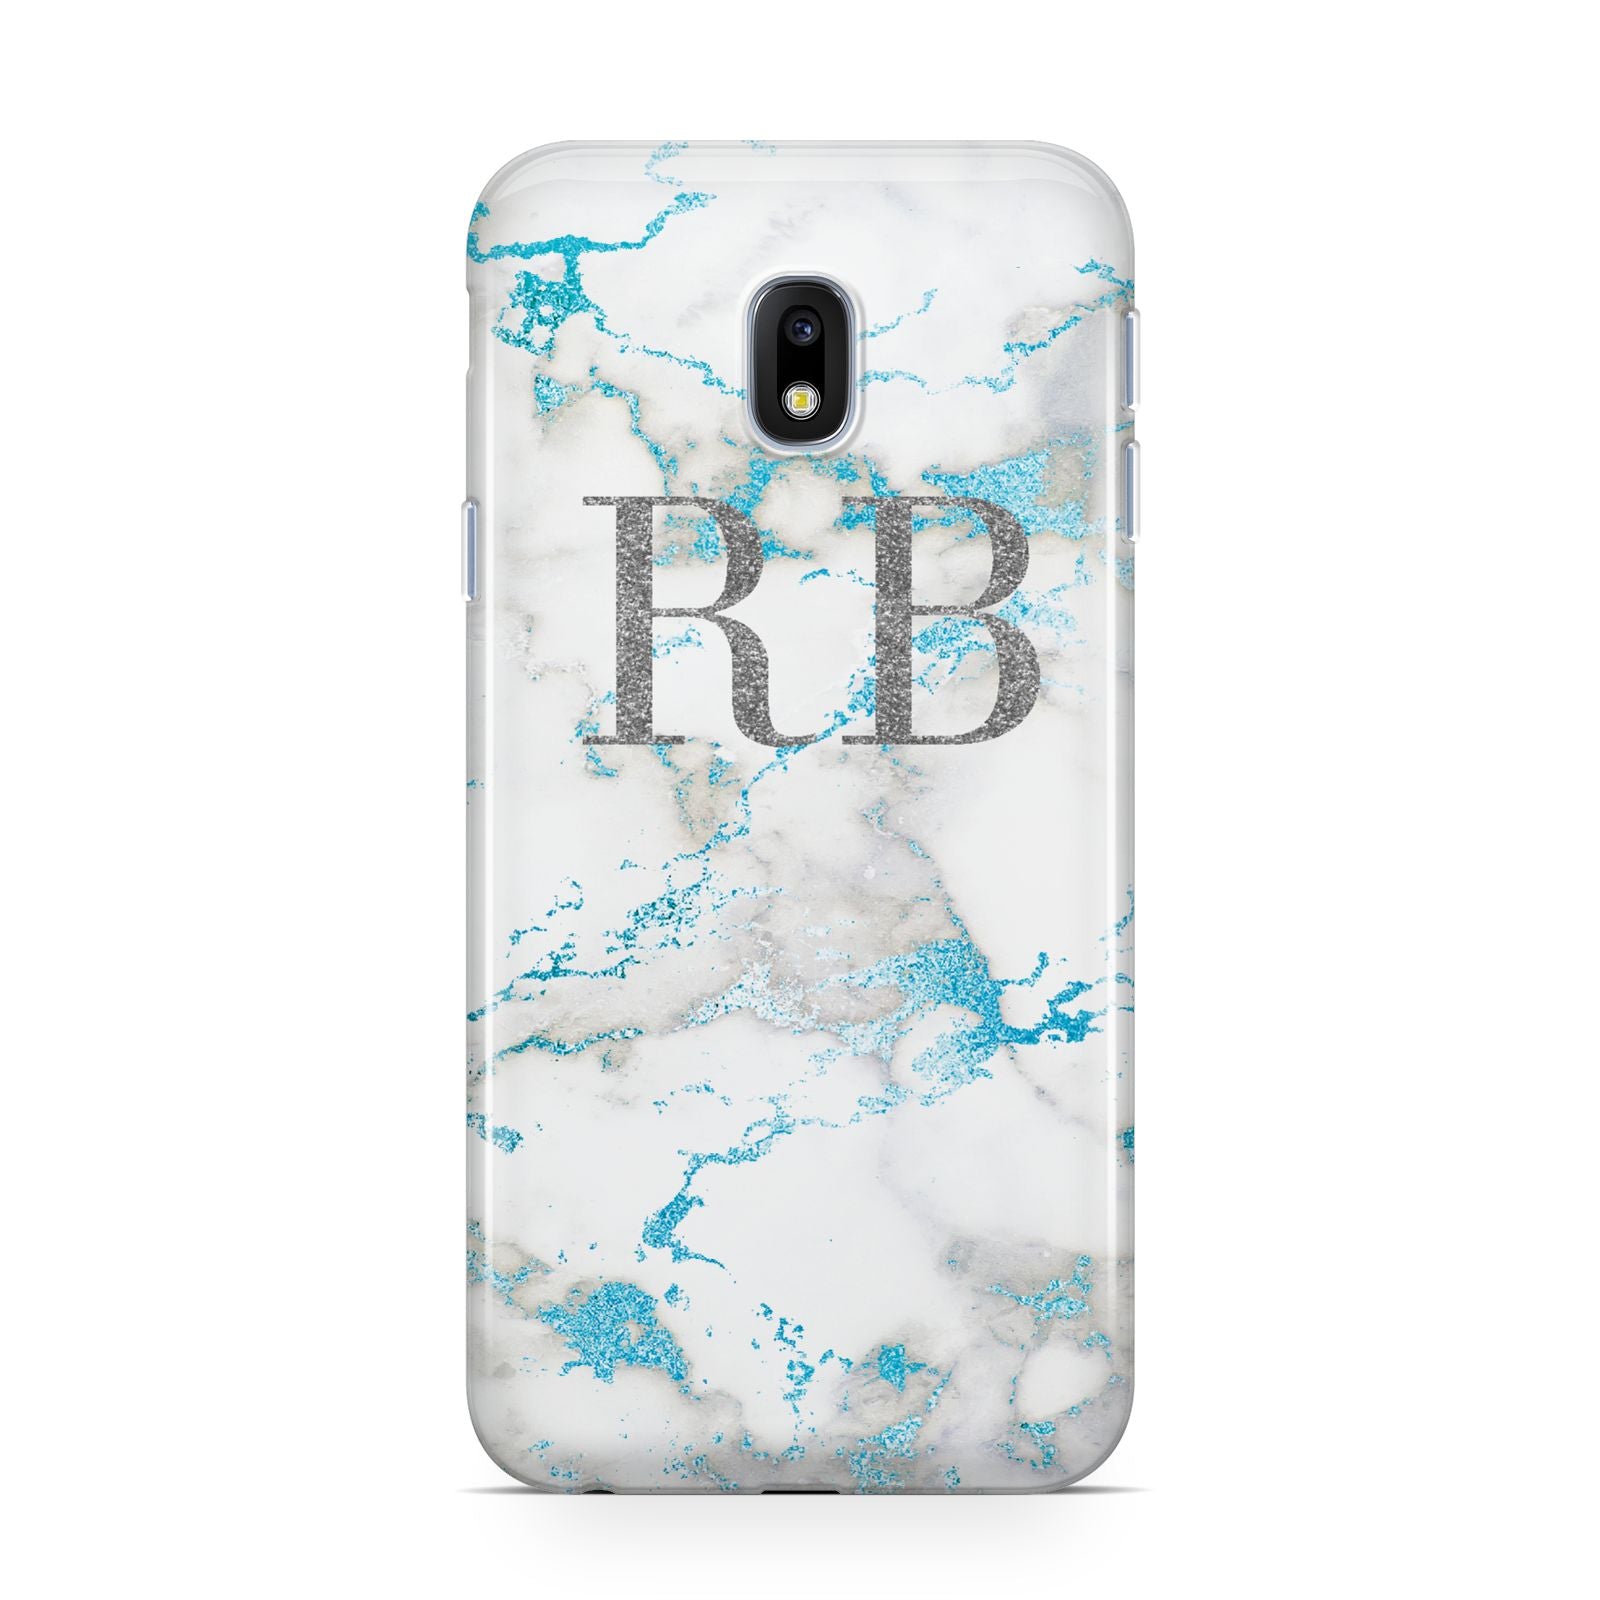 Personalised Blue Marble Initials Samsung Galaxy J3 2017 Case